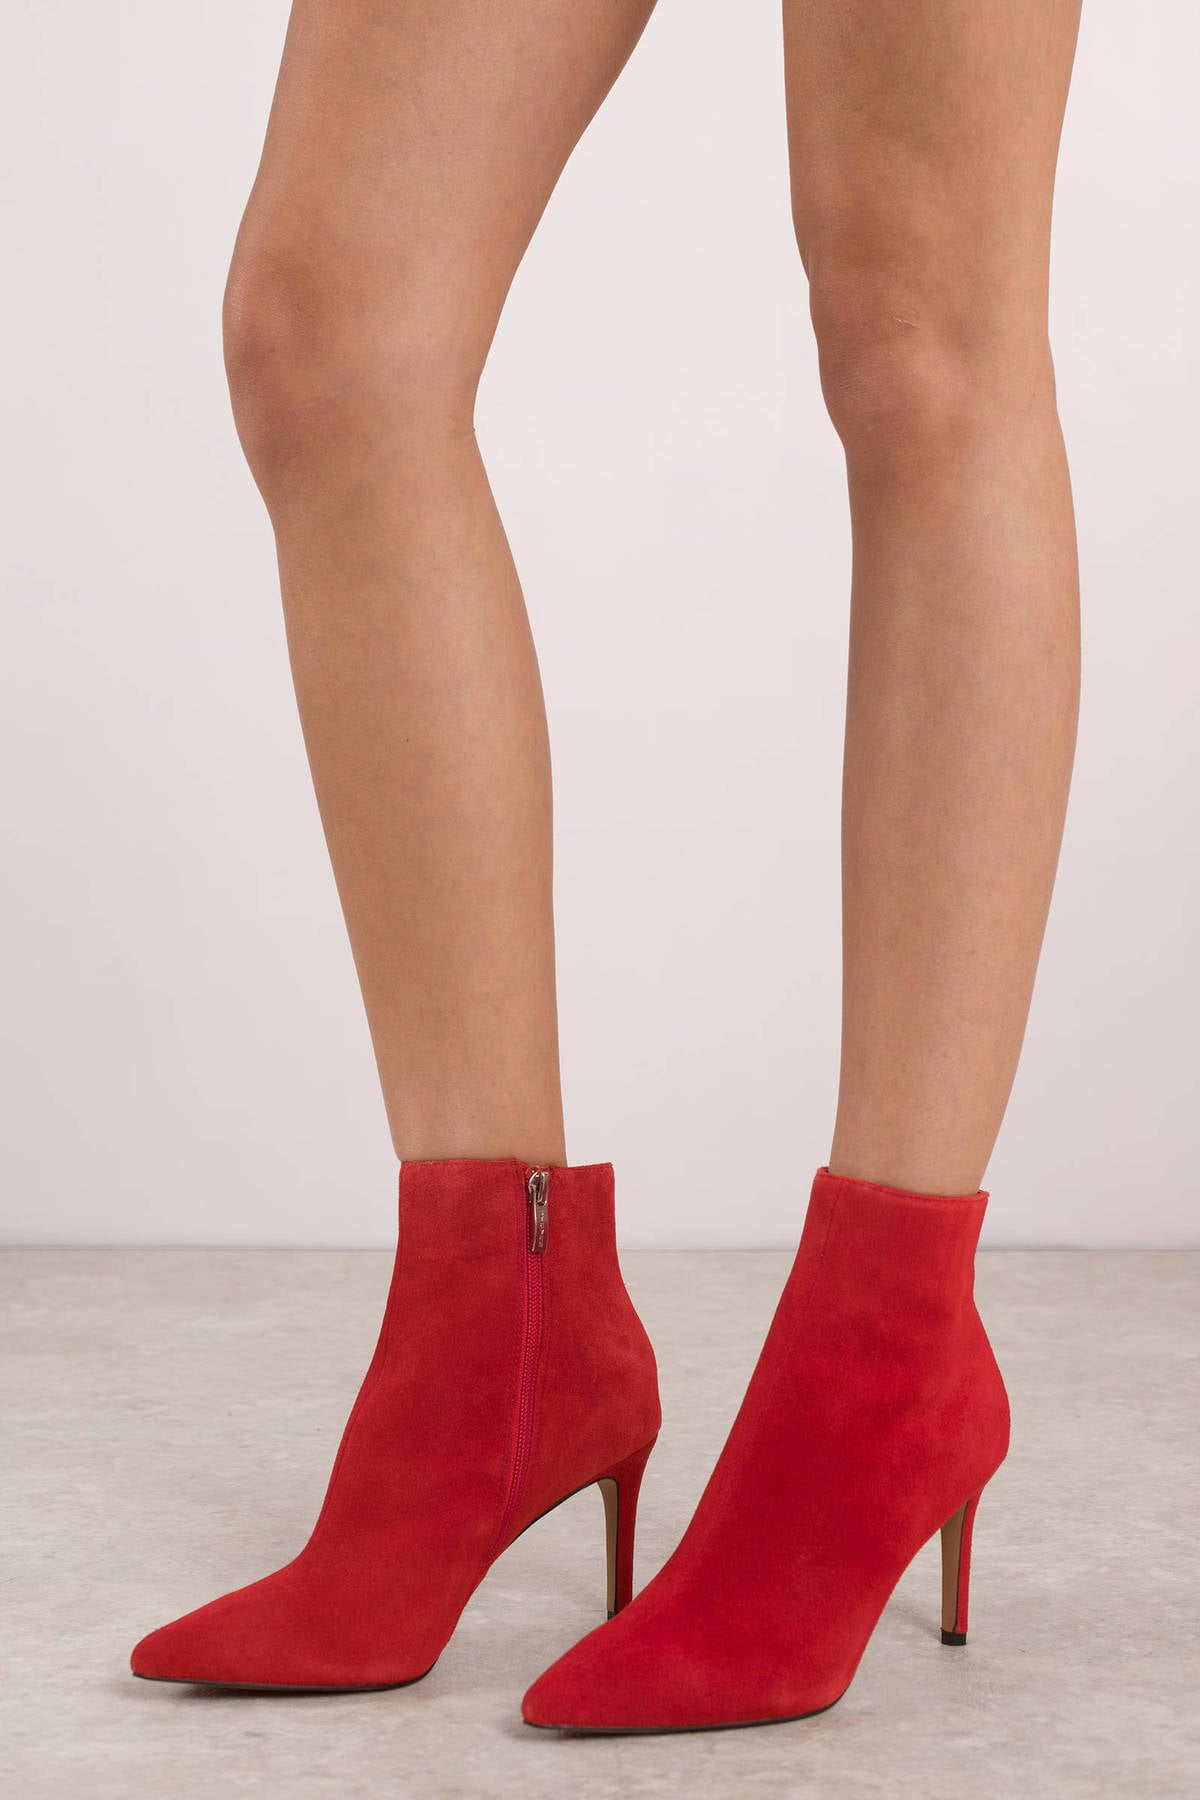 steve madden red booties